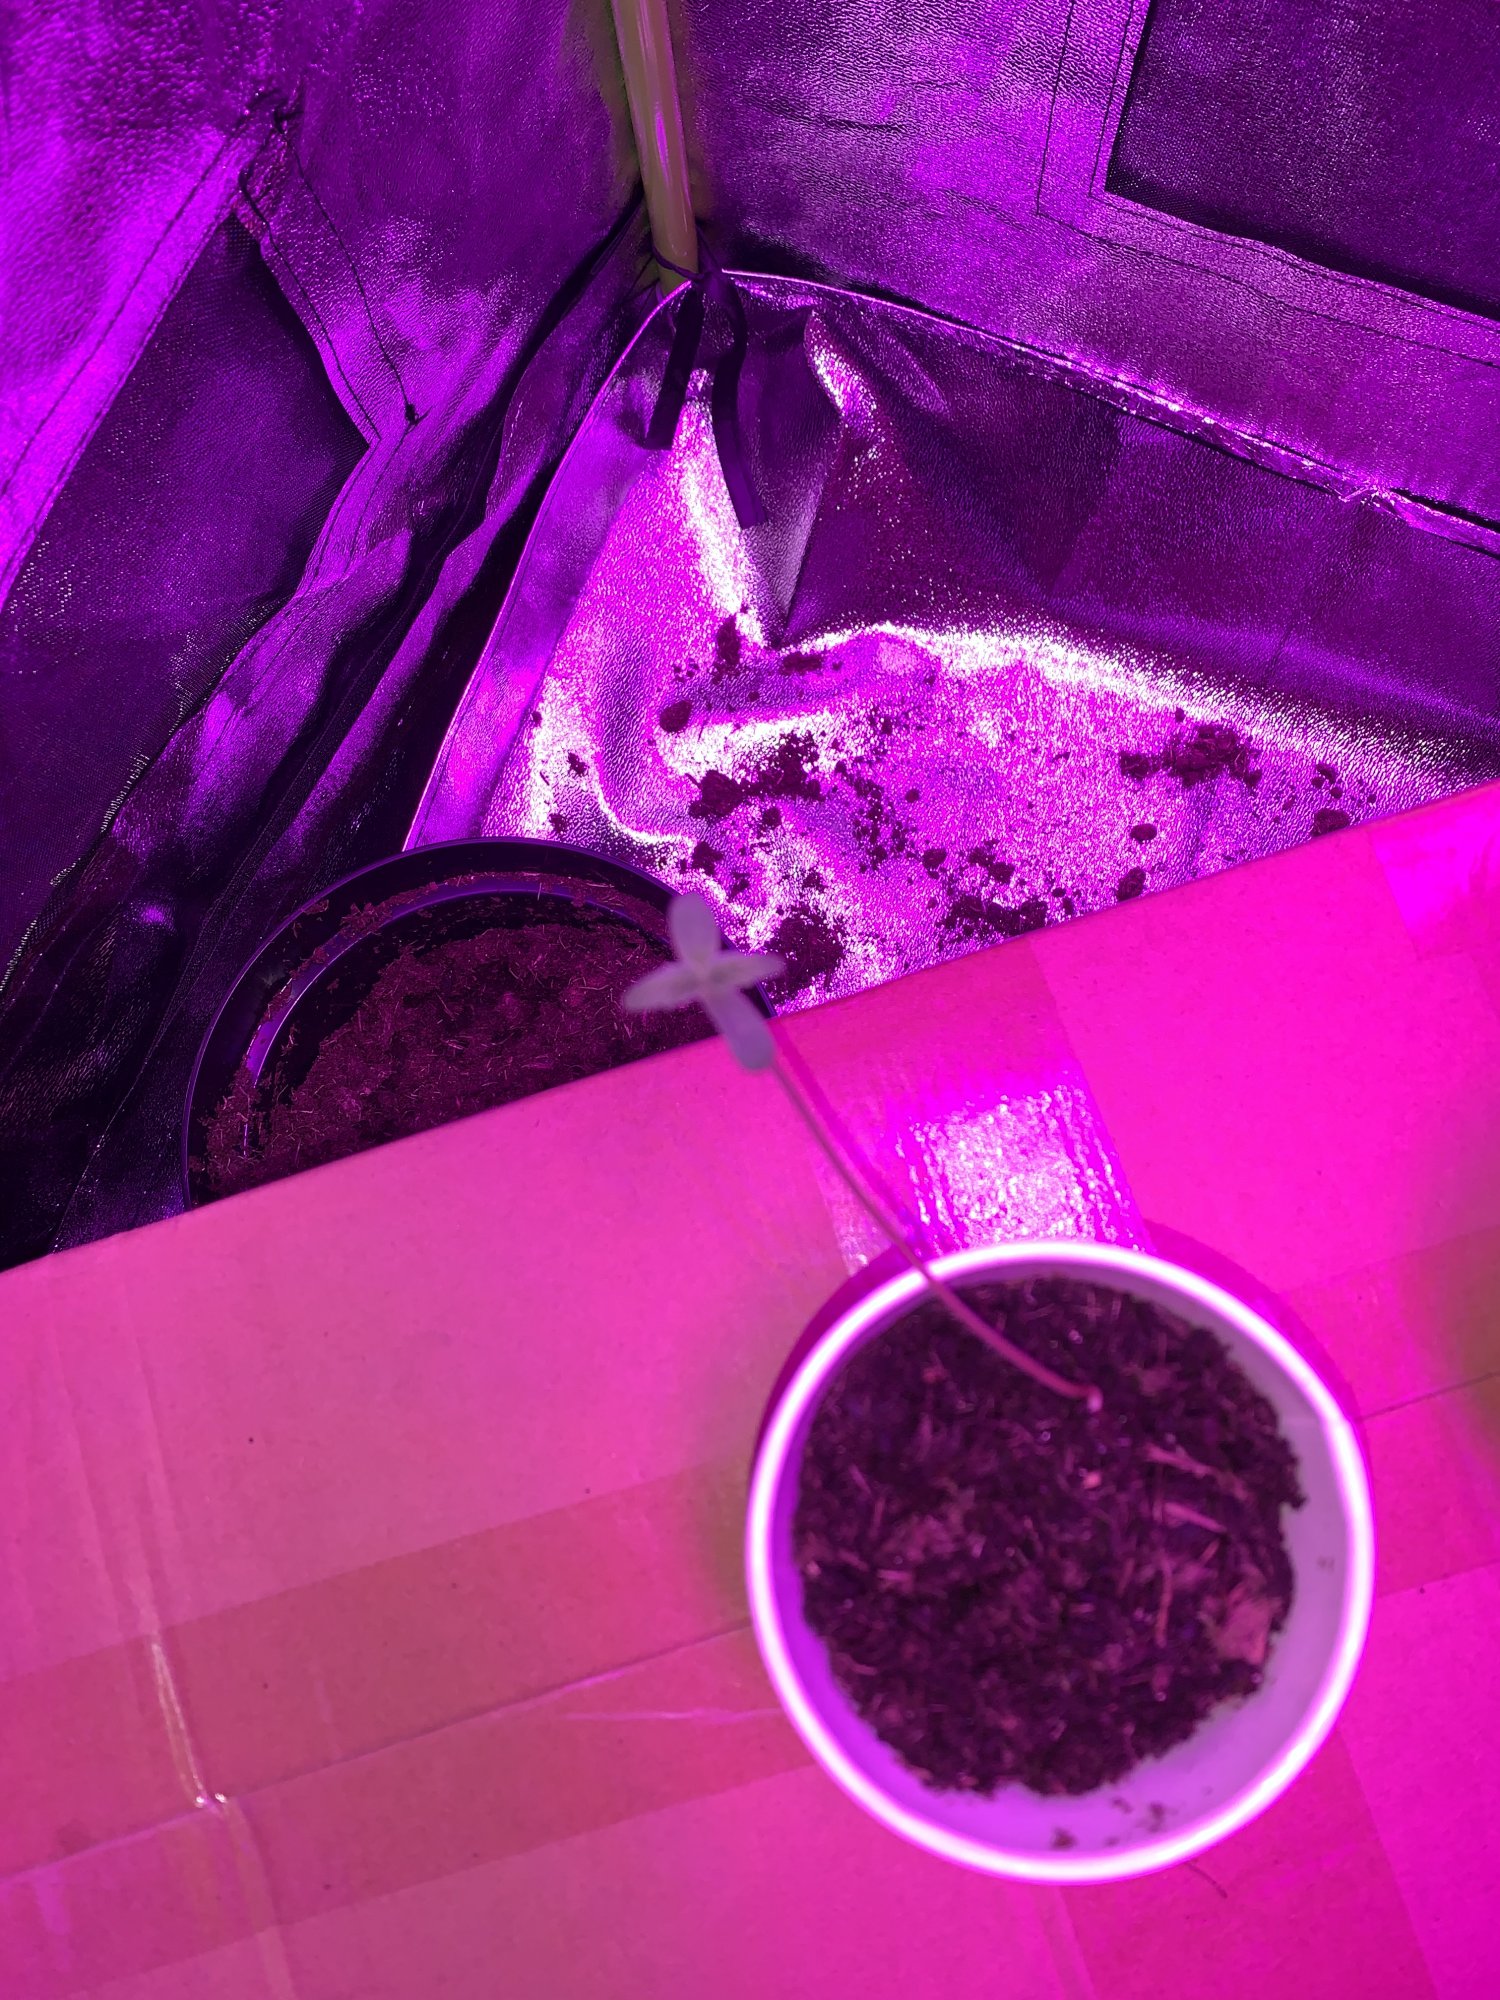 First timer growing 3 plants 7